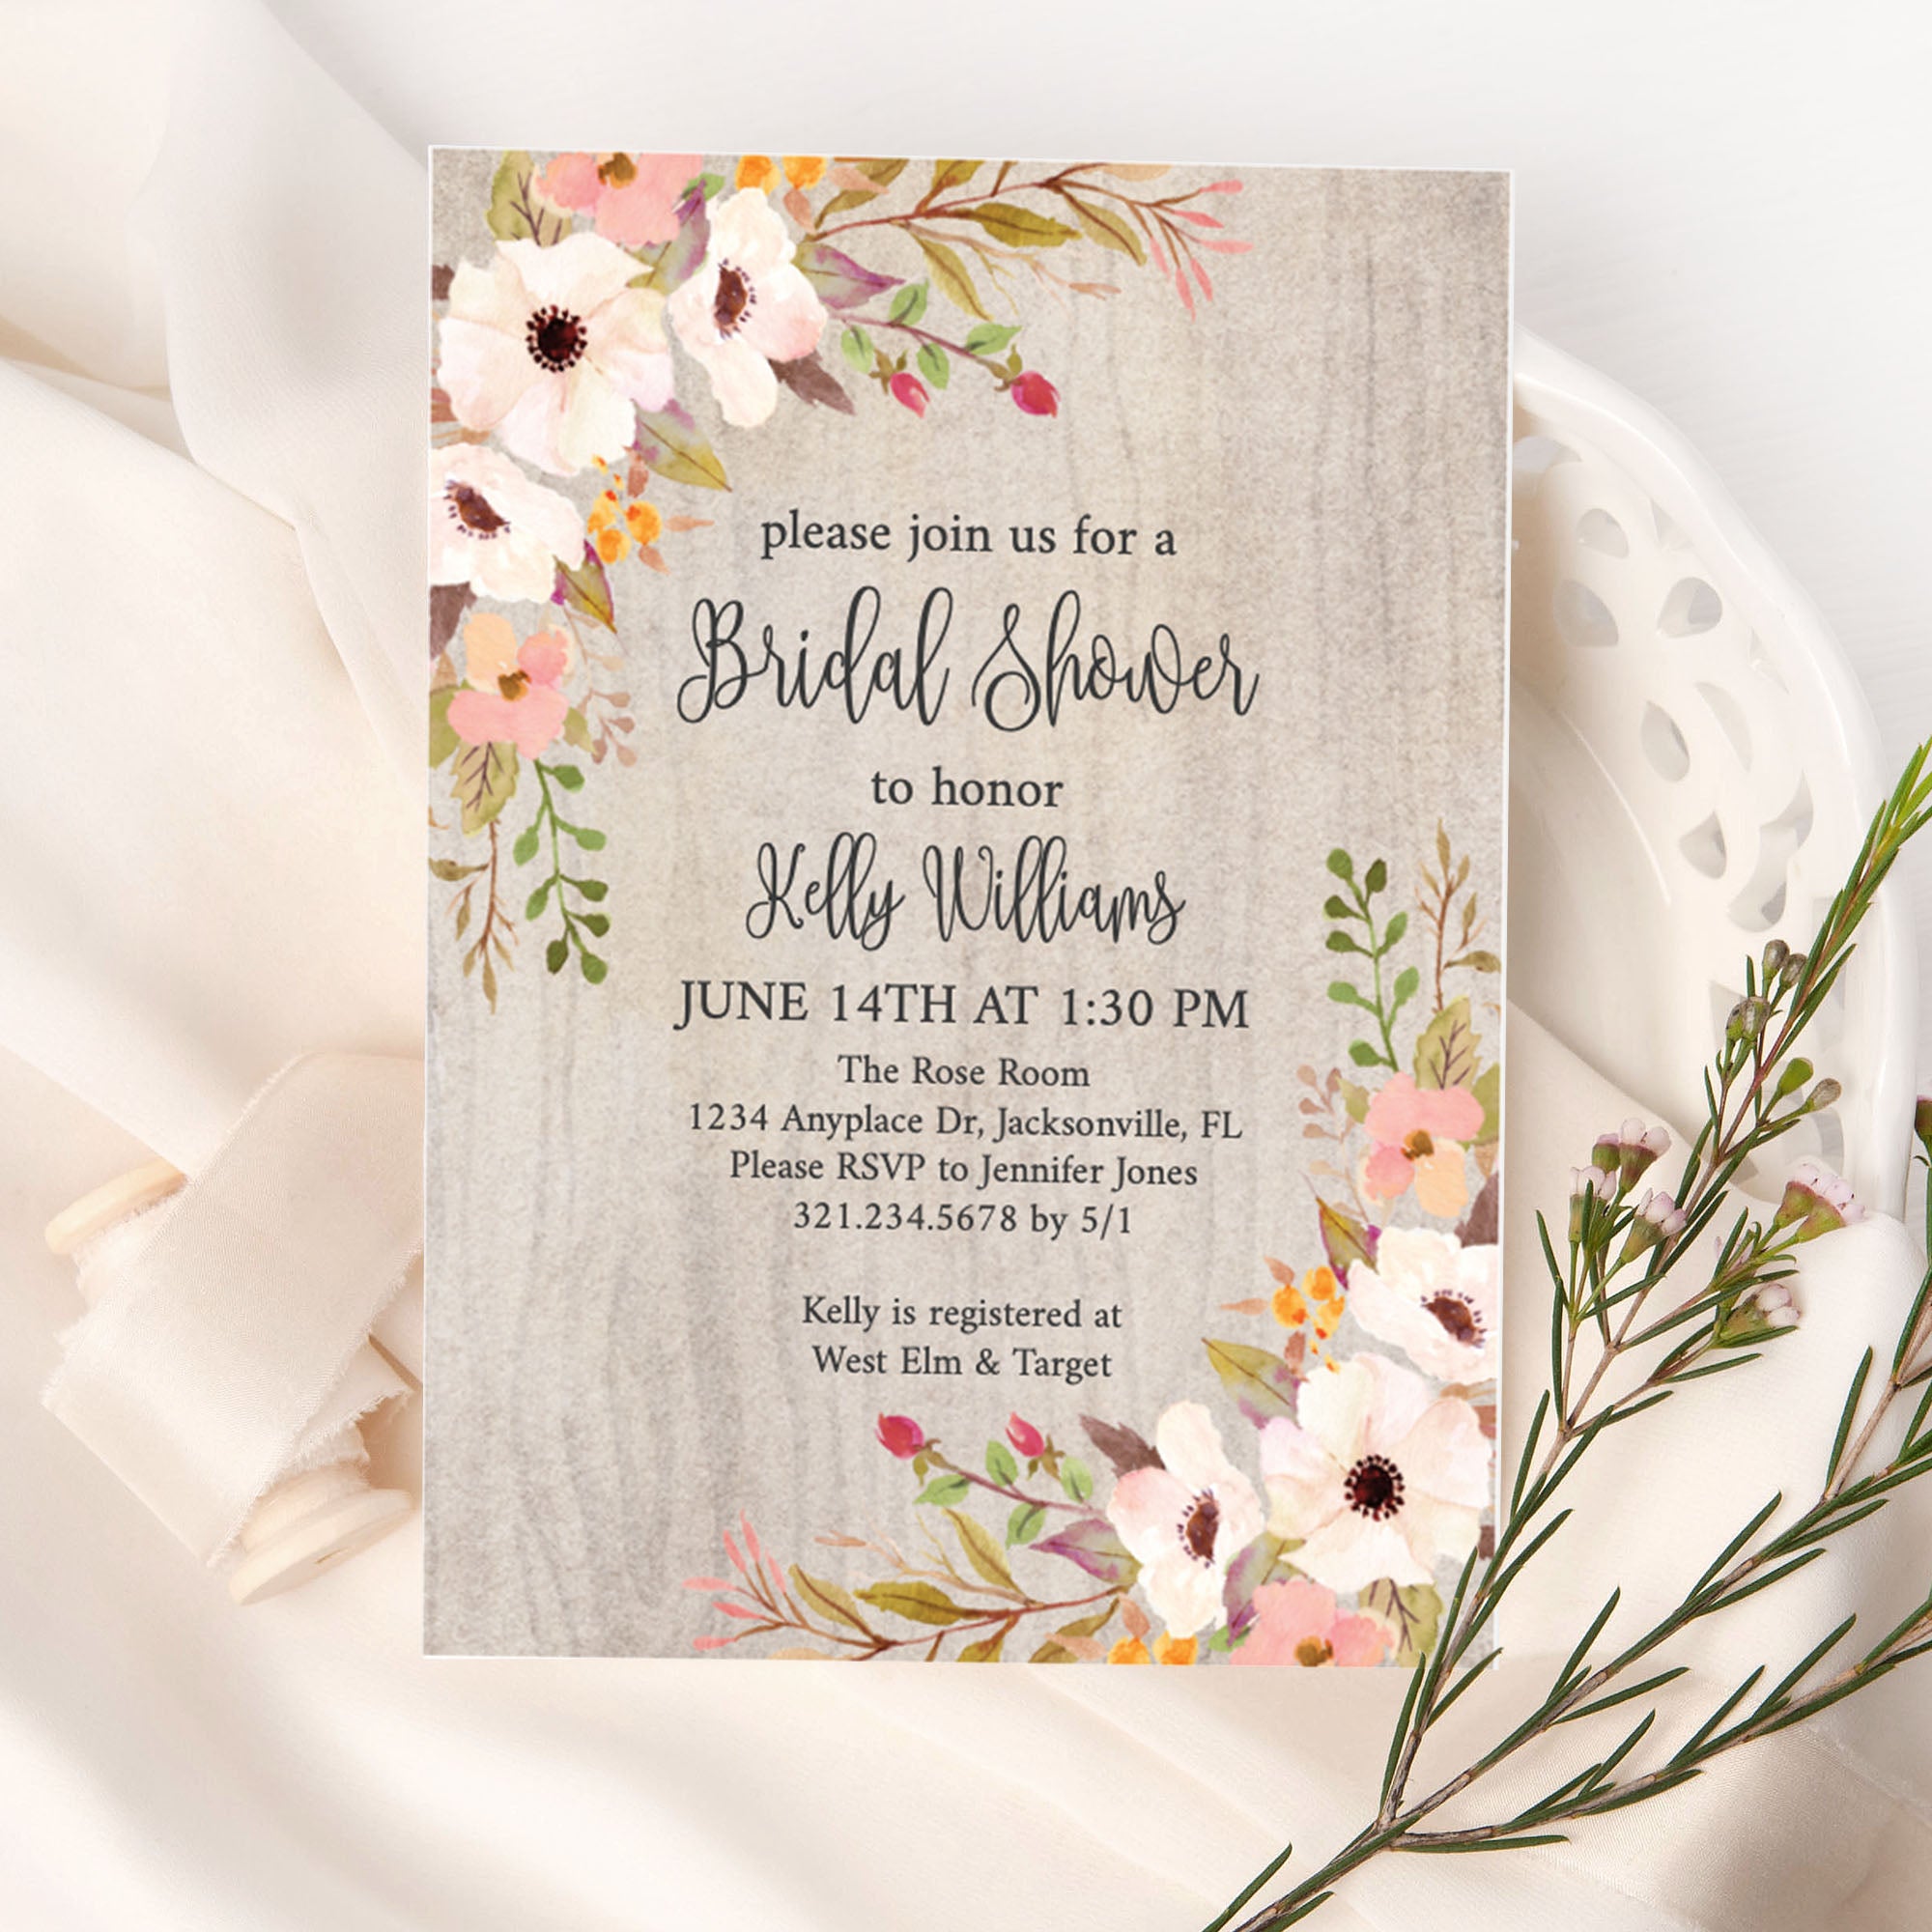 Invitation Cards - 50 Fill-In Floral Classy Cards with Envelopes. Great for  Birthday Invitations, Bridal Shower Invitations, Baby Shower Invitations,  and Weddin…